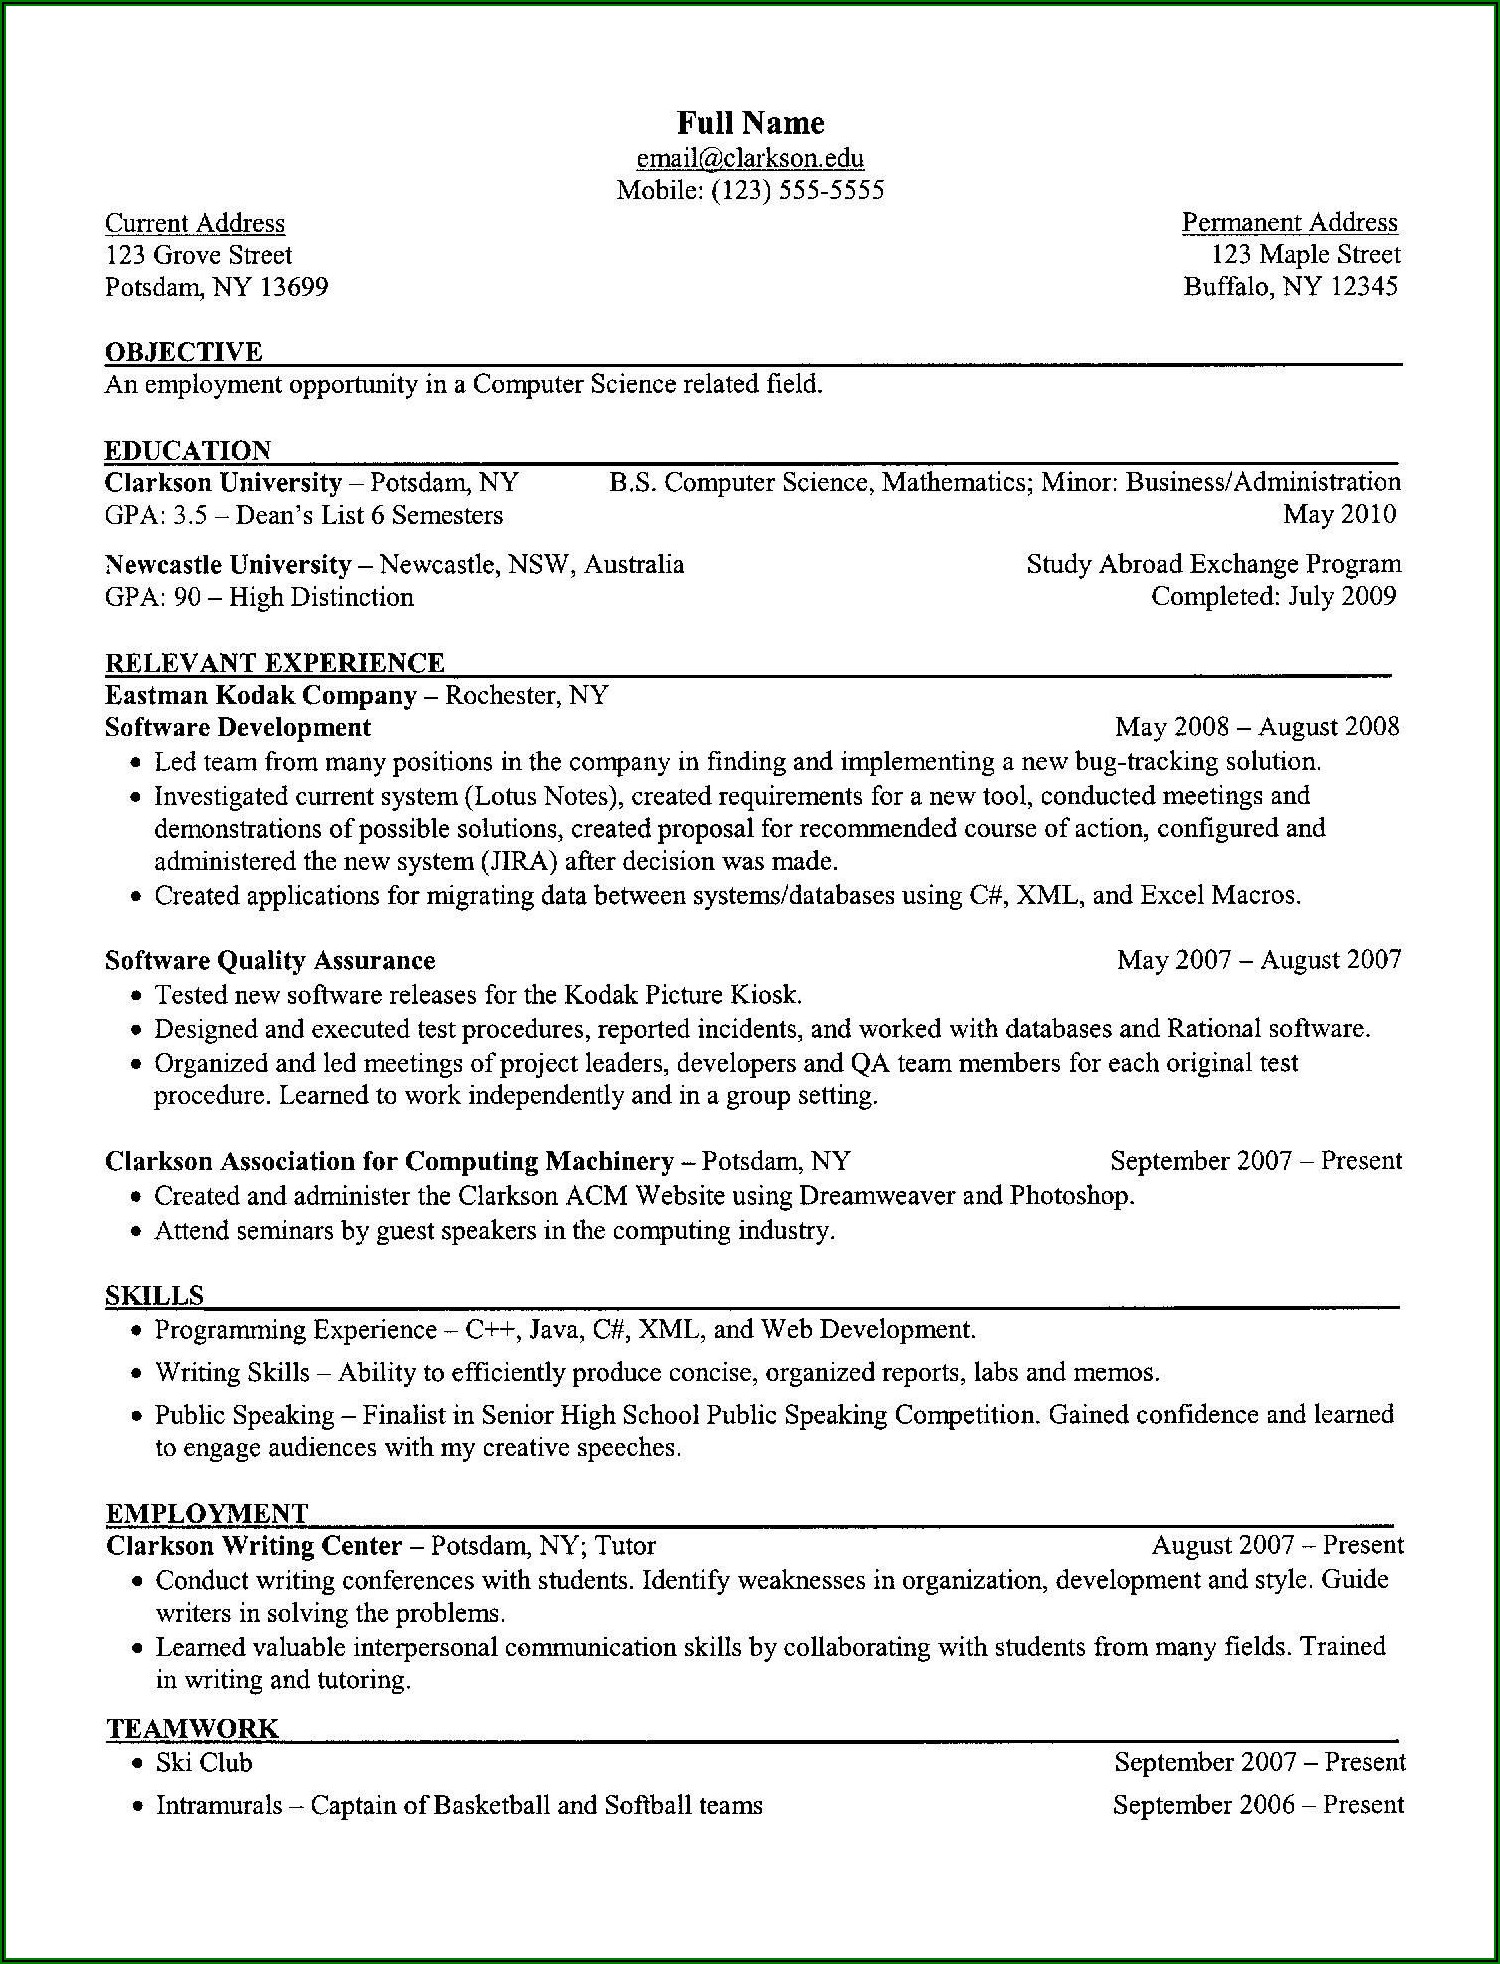 Sample Resume Templates In Word Format